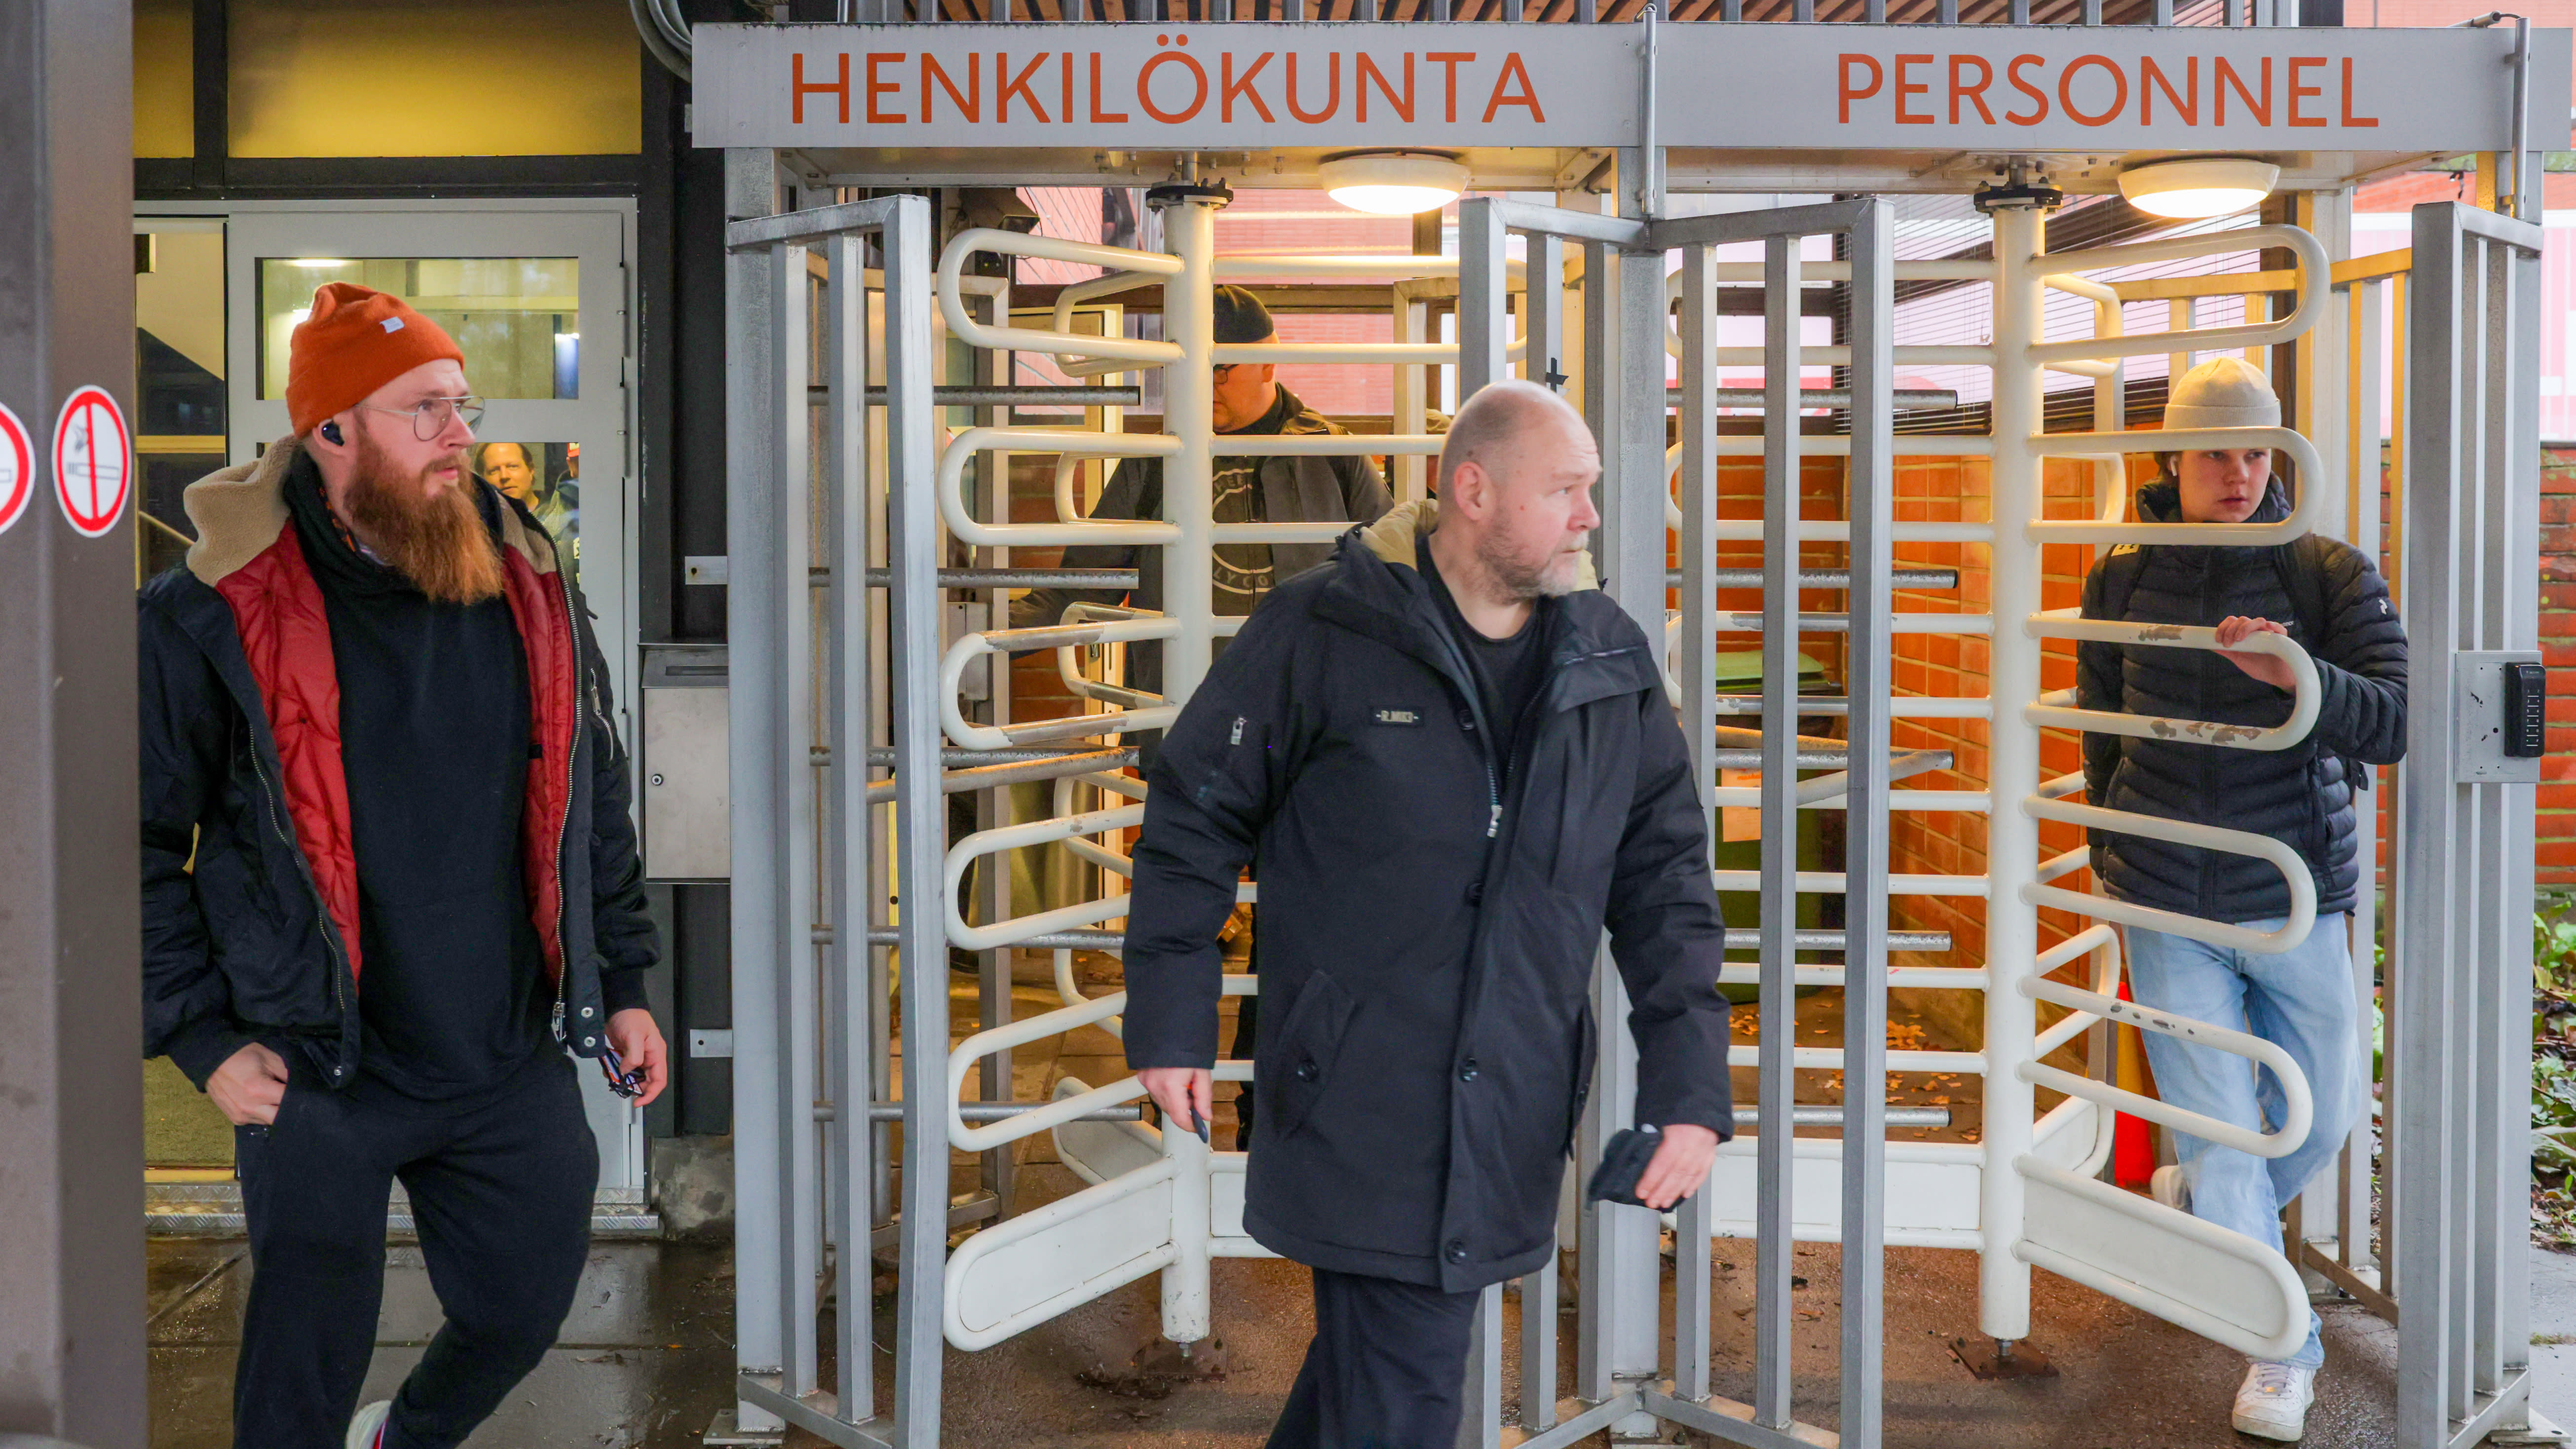 More than 1,000 employees of Kesko’s logistics center are organizing a walkout due to the delay in salary negotiations